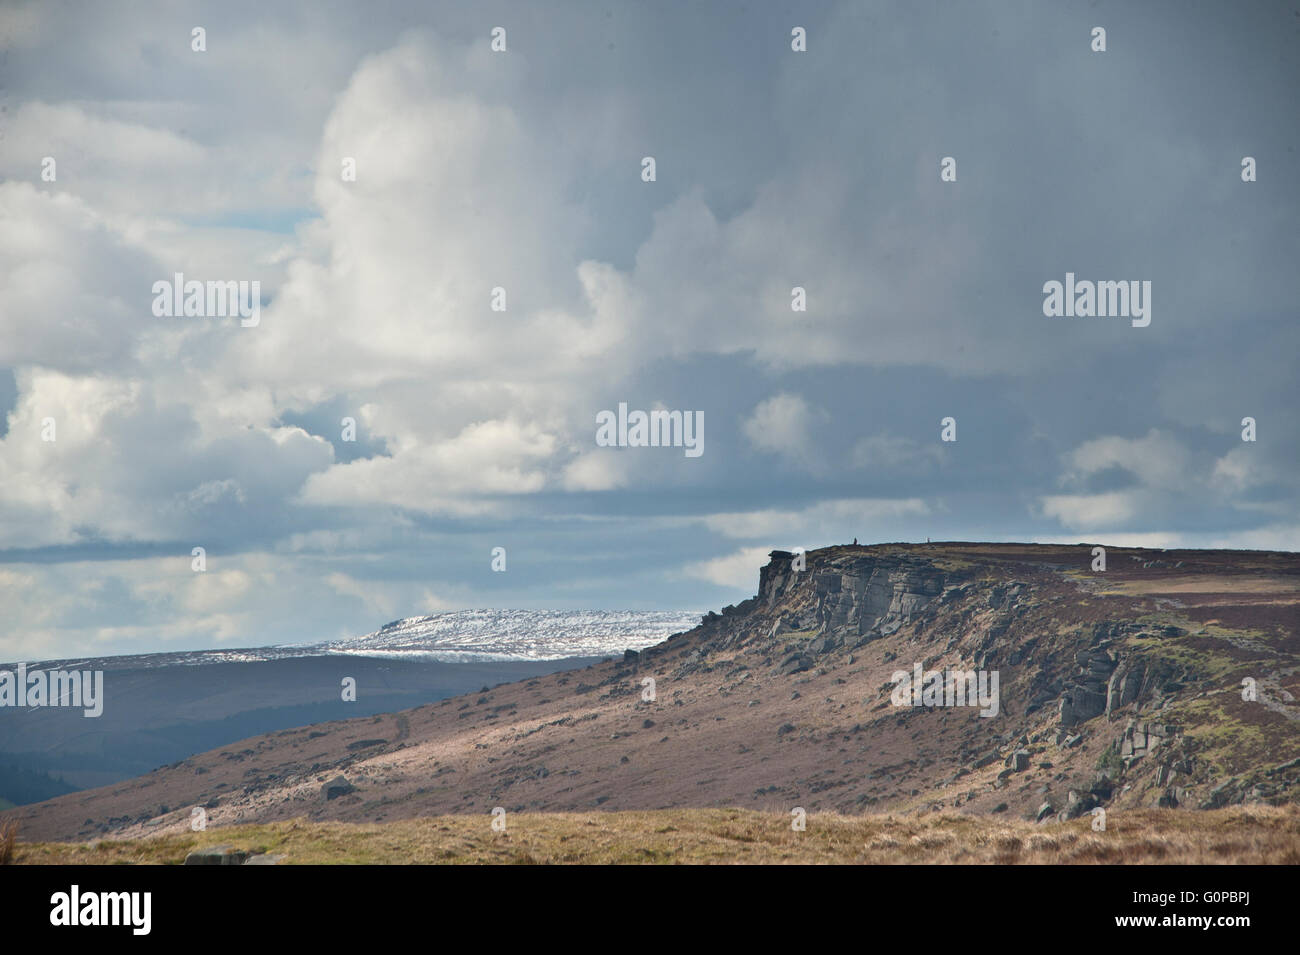 Stanage, stanage edge, peak district, gritstone, climbing, bouldering, high peak, south Yorkshire, grindstones, rock, geology Stock Photo